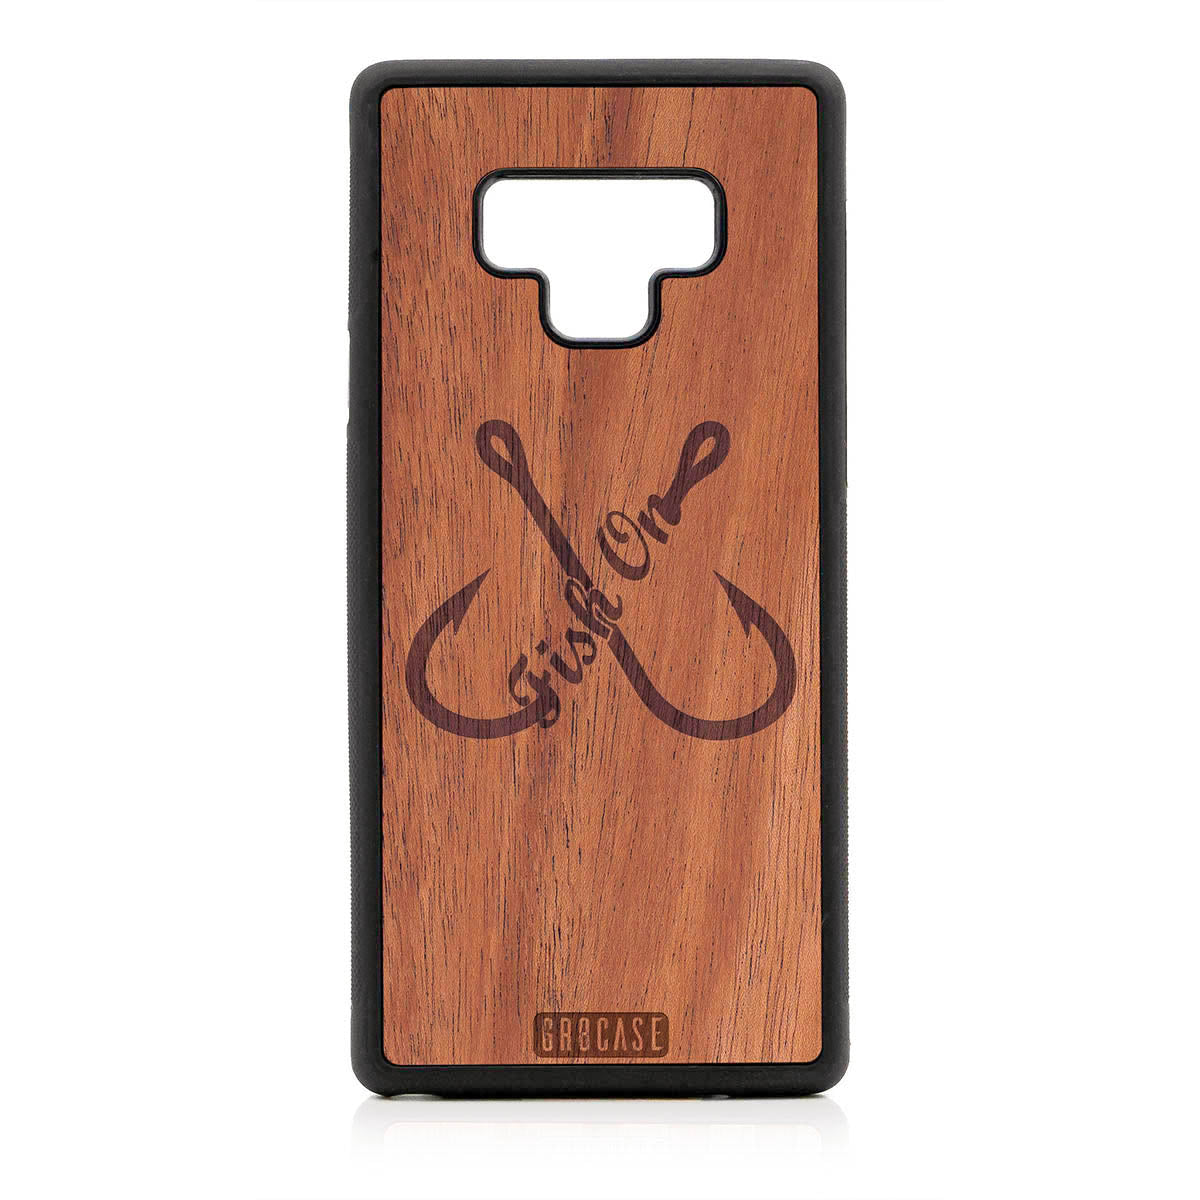 Fish On (Fish Hooks) Design Wood Case For Samsung Galaxy Note 9 by GR8CASE